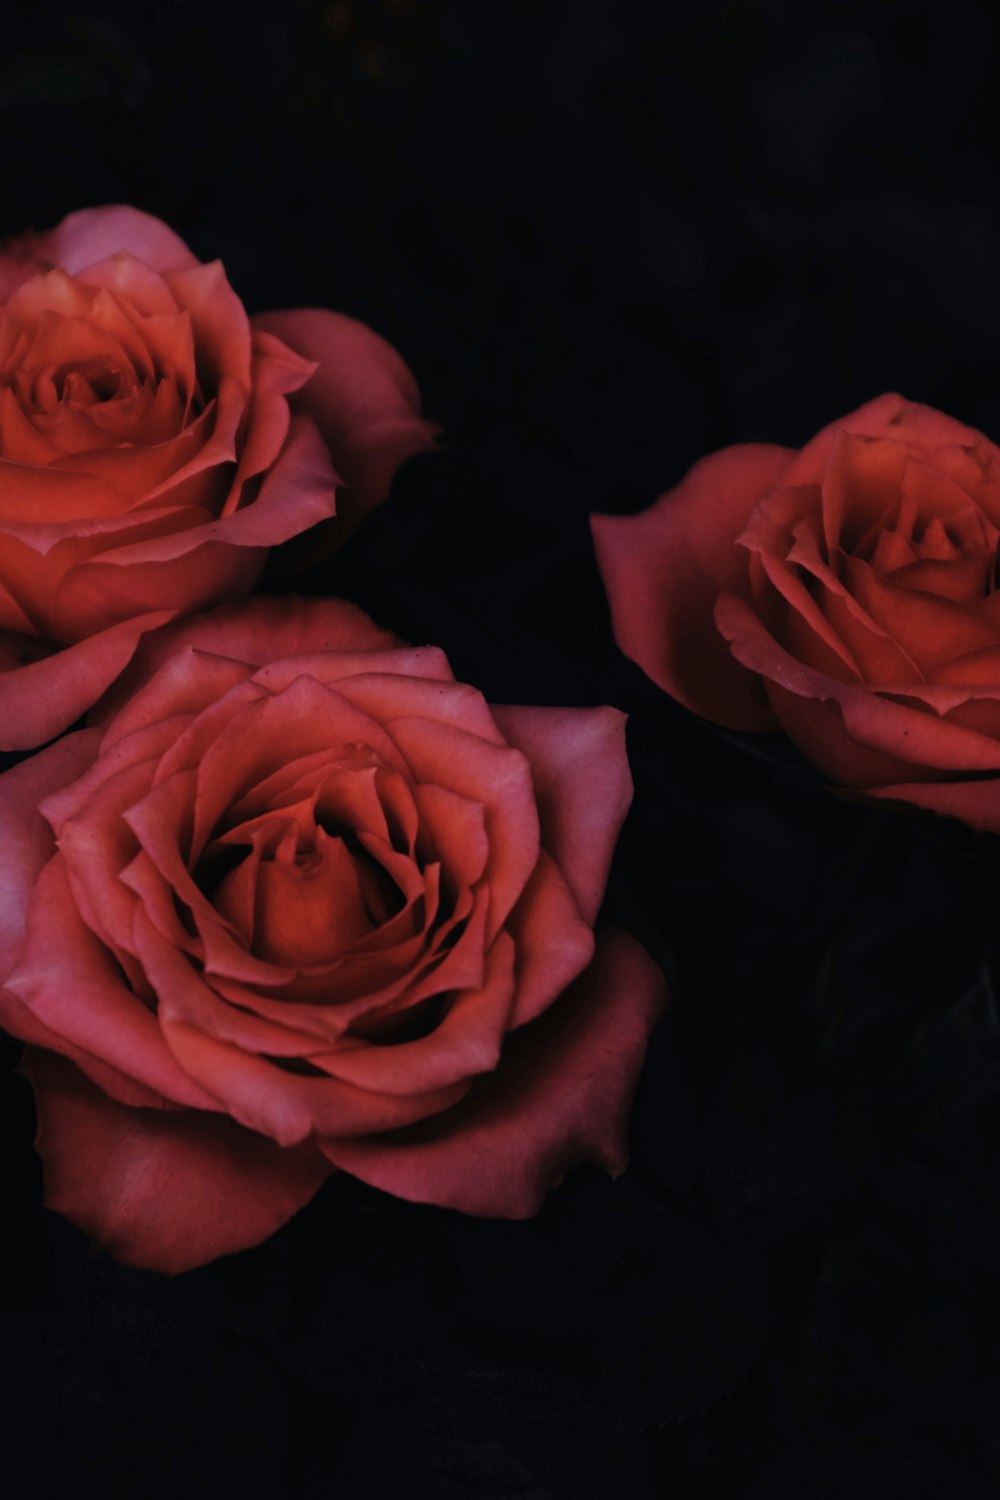 chiaroscuro photography of three red roses